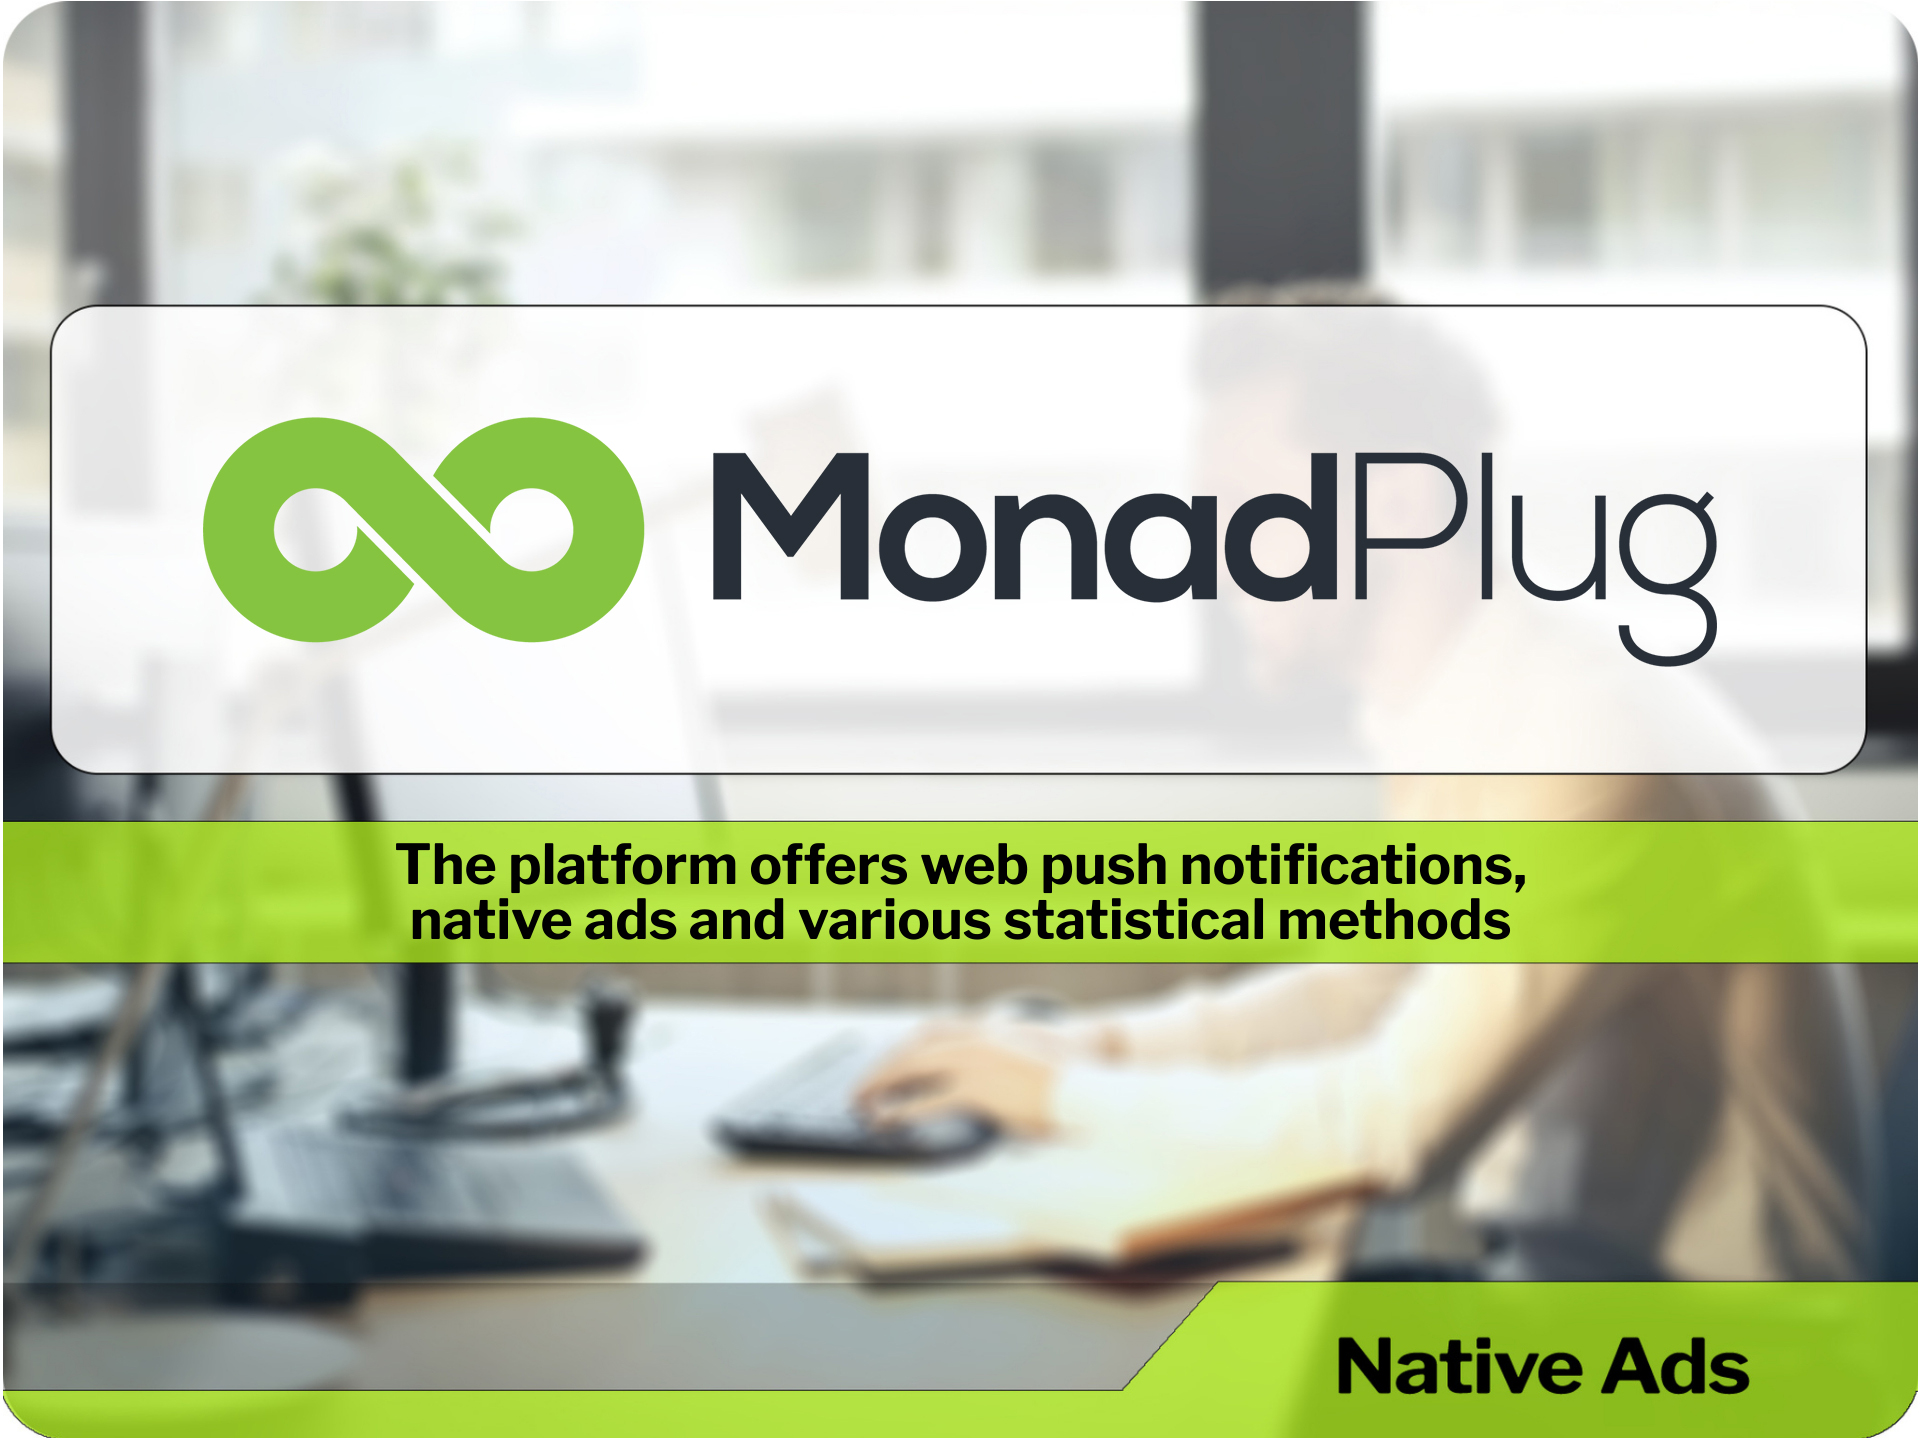 MonadPlug. The platform offers web push notifications, native ads and various statistical methods